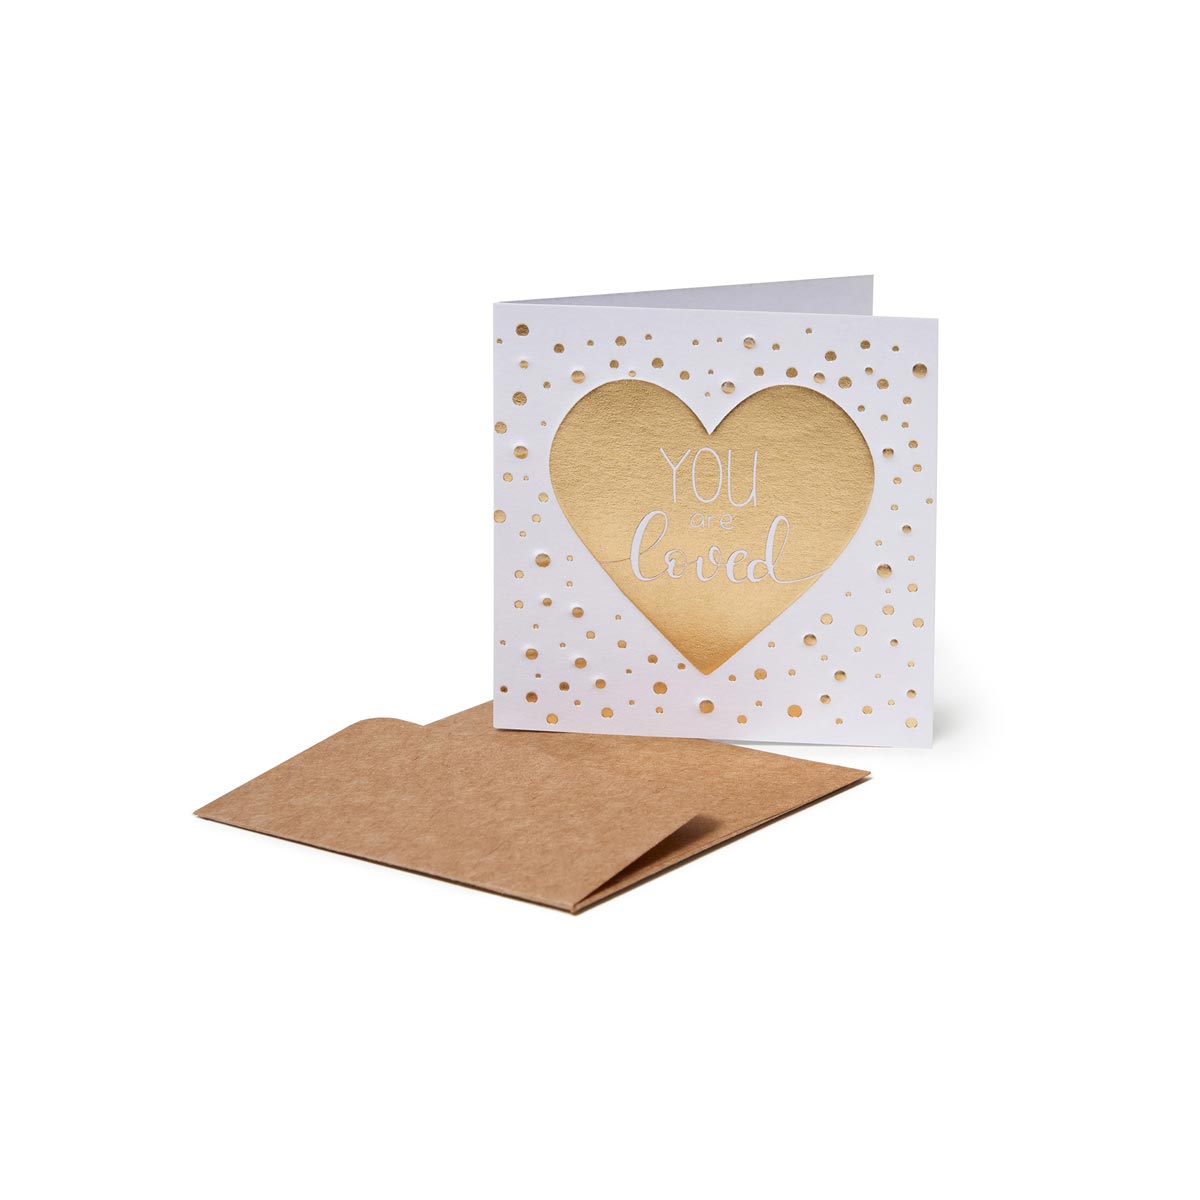 LEGAMI Mini greeting card for any occasion – You are loved